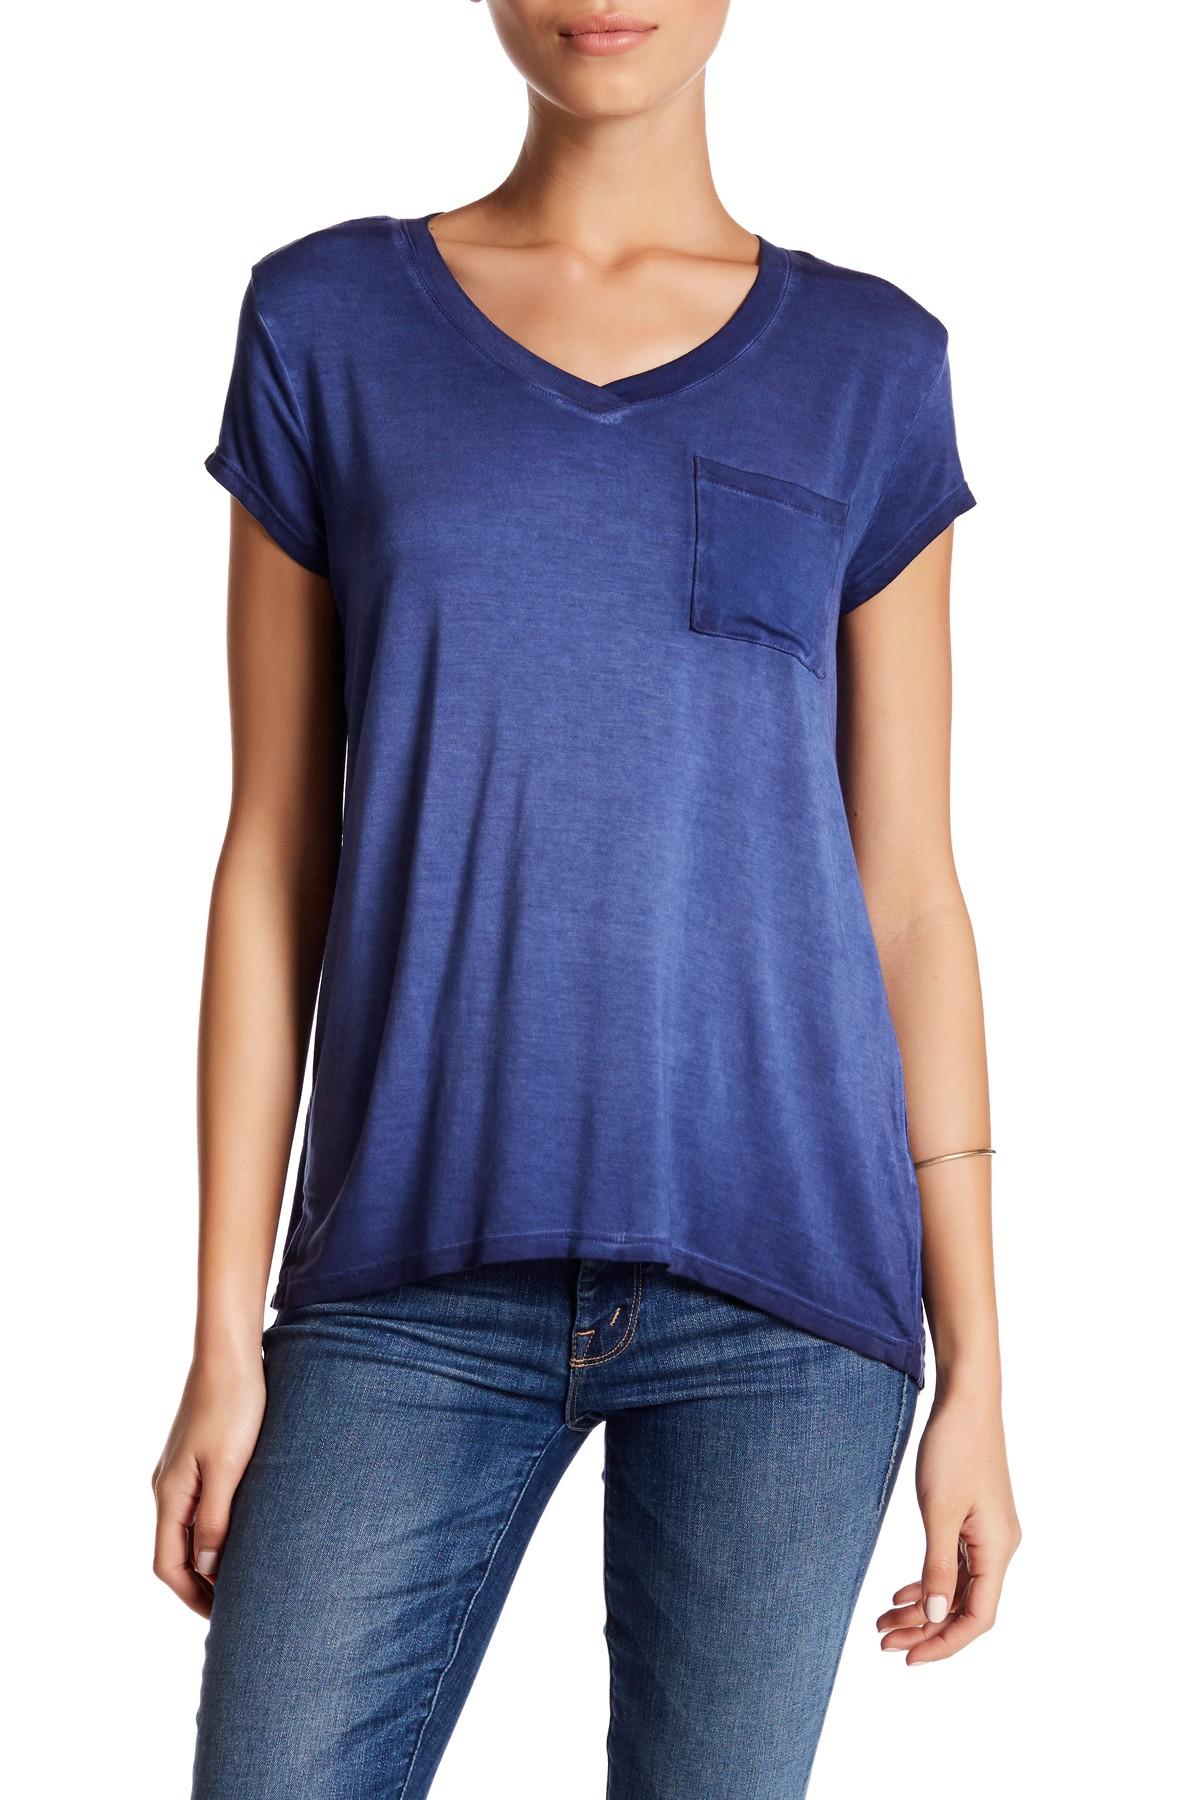 Cable & Gauge Washed V-neck T-shirt (petite) in Blue | Lyst